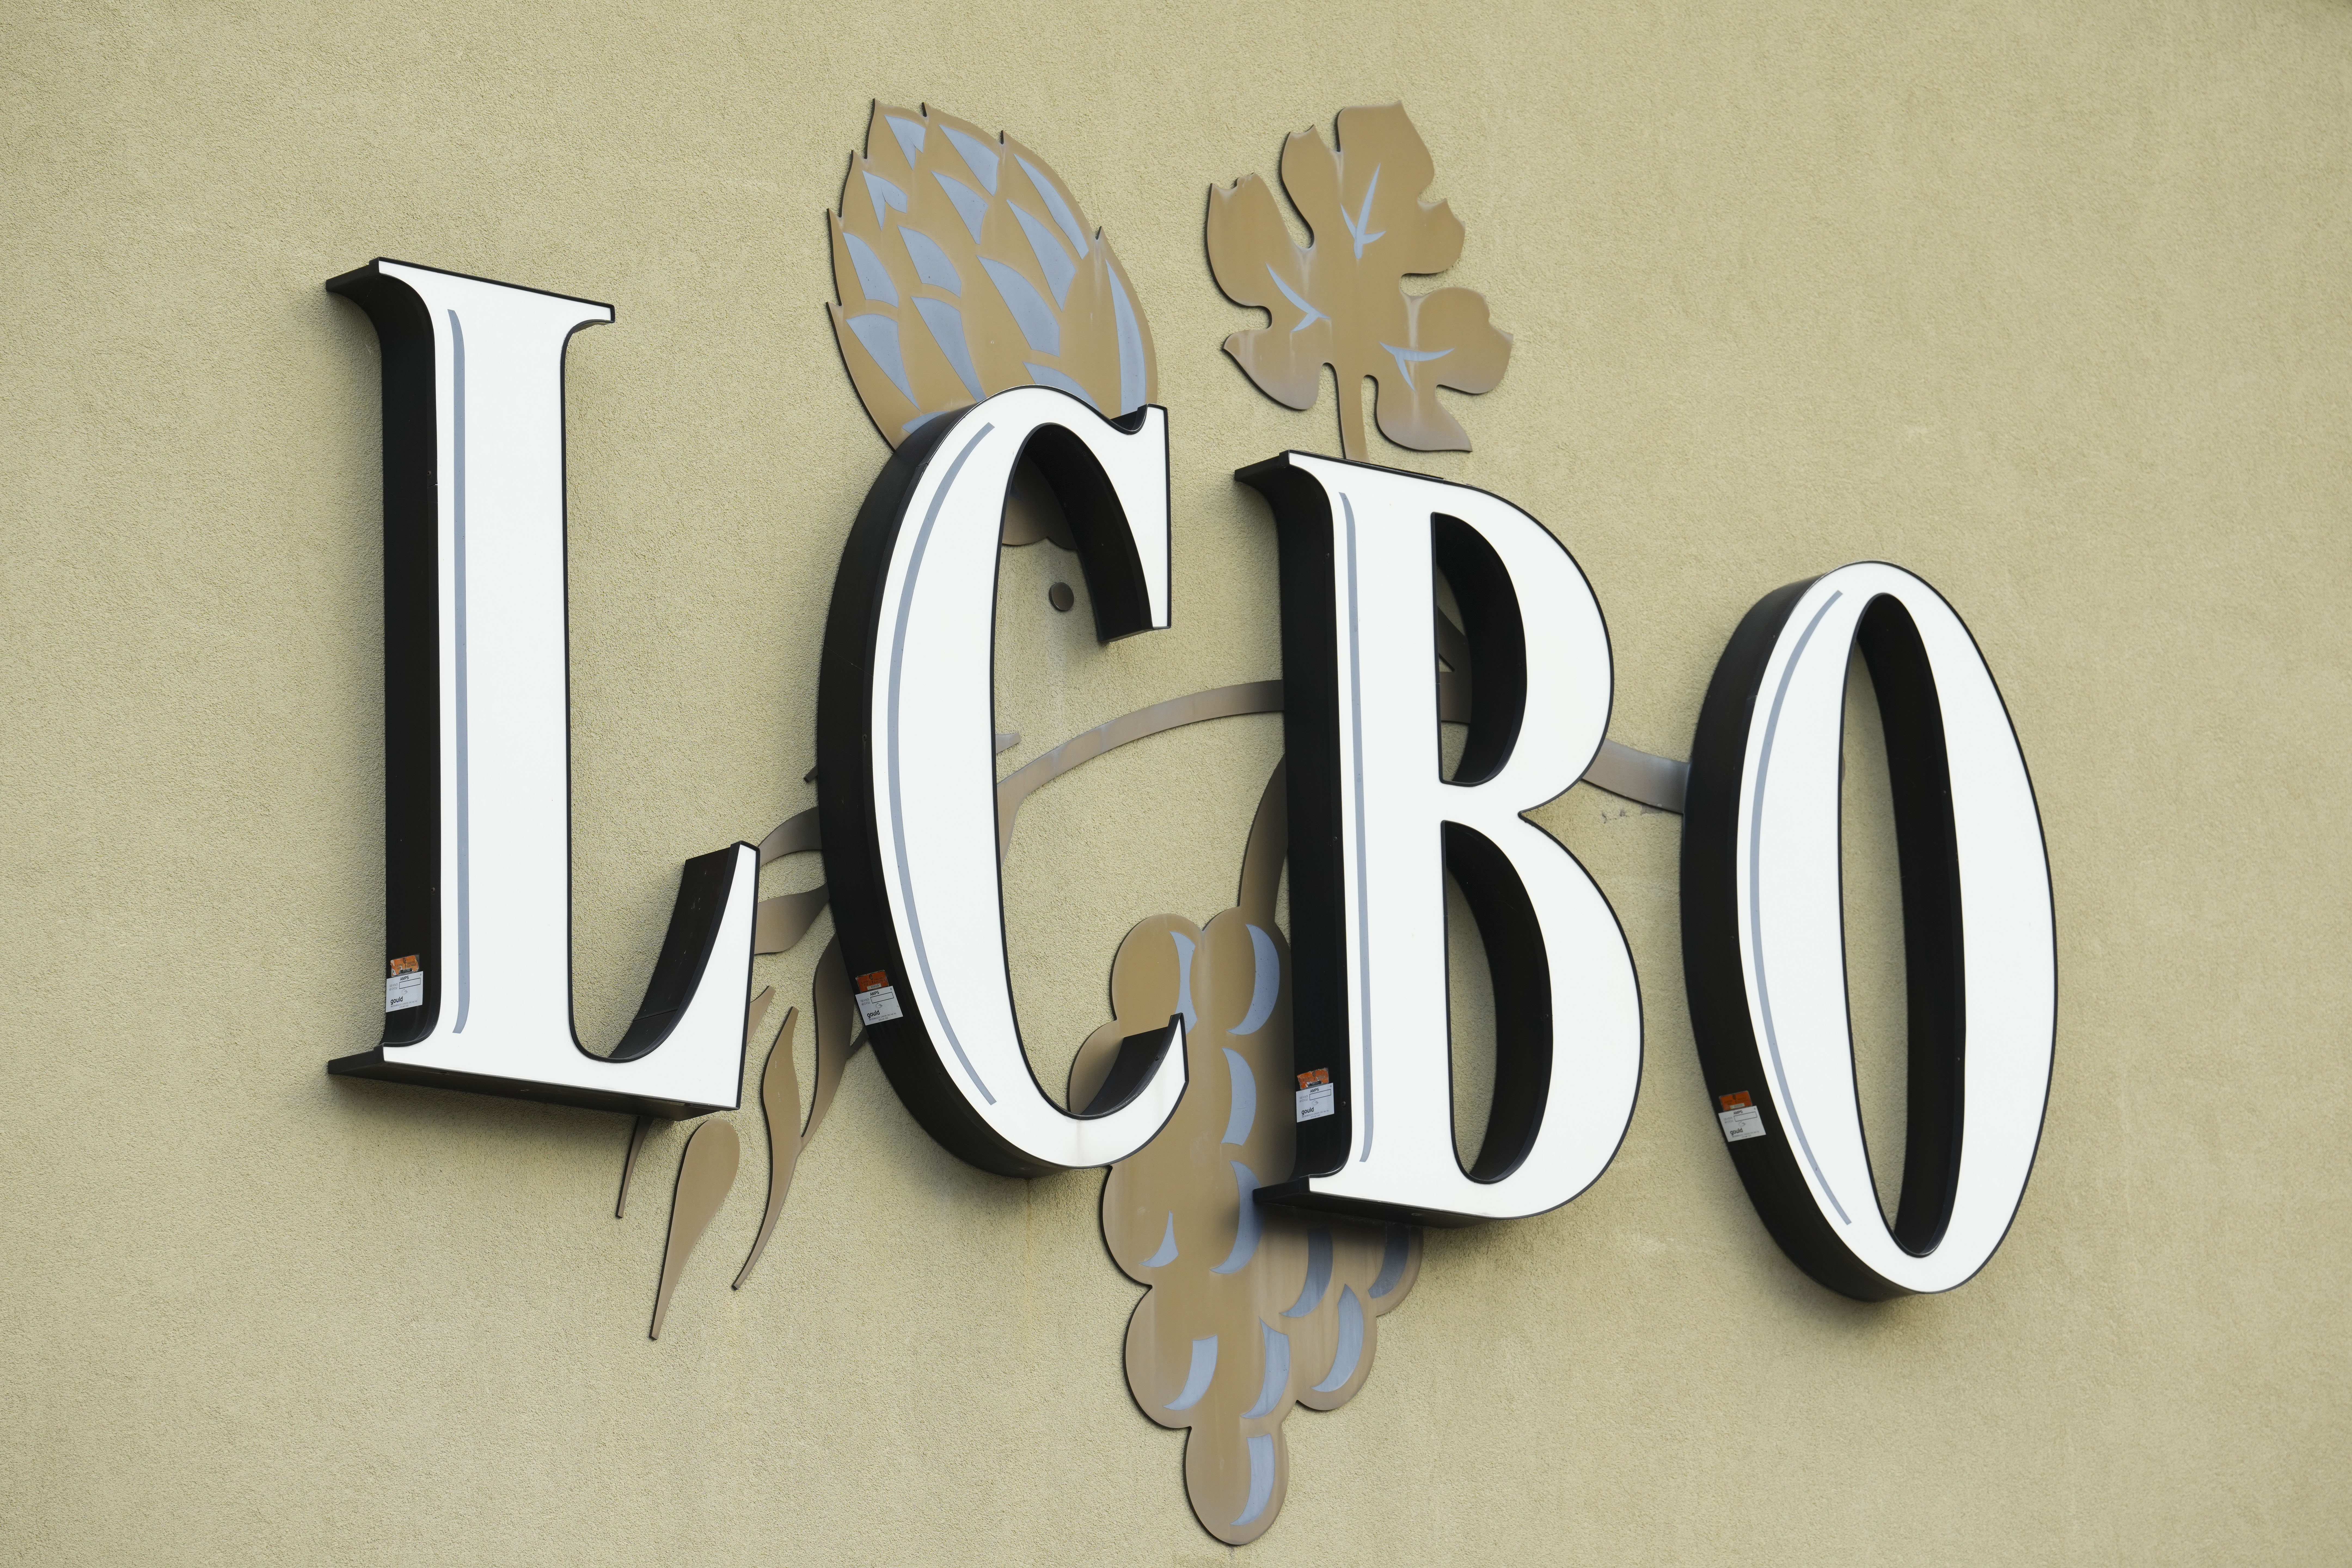 LCBO workers moving closer to strike action that could shut Ontario liquor stores